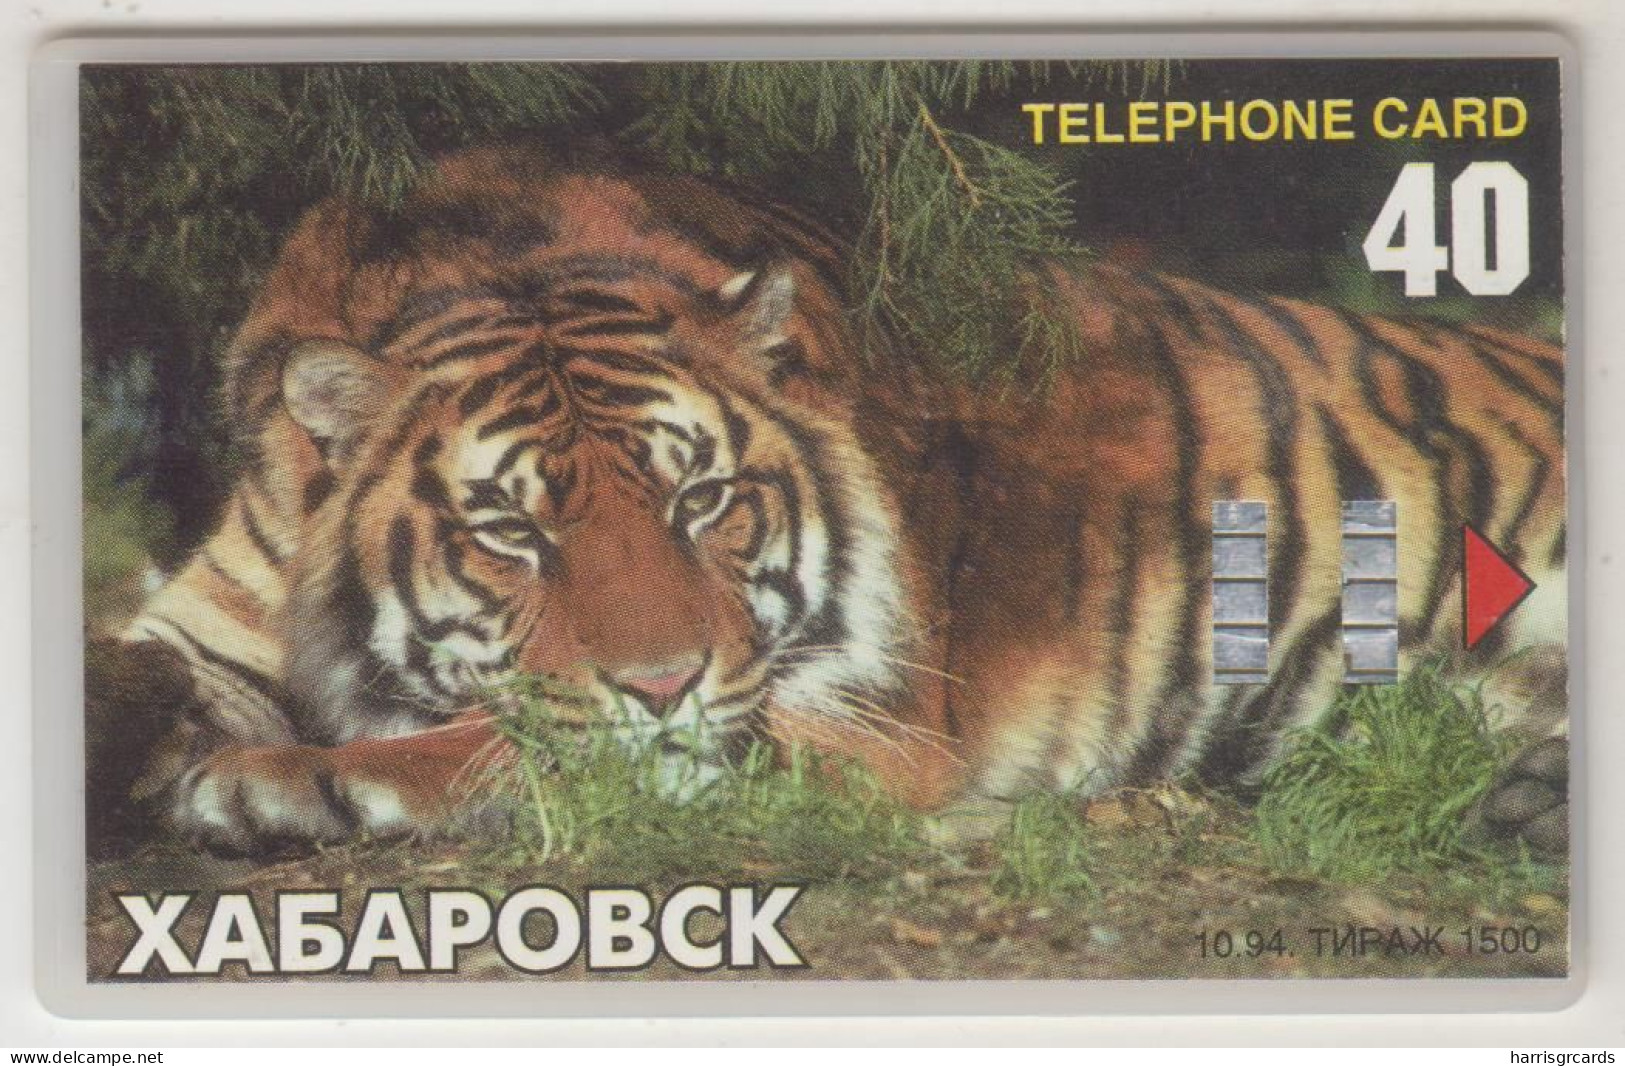 RUSSIA - Chabarovsk Tiger, 40 U, Tirage 4.000, Used, Real Exiton Card, Fake Sticker Overprint - Russie